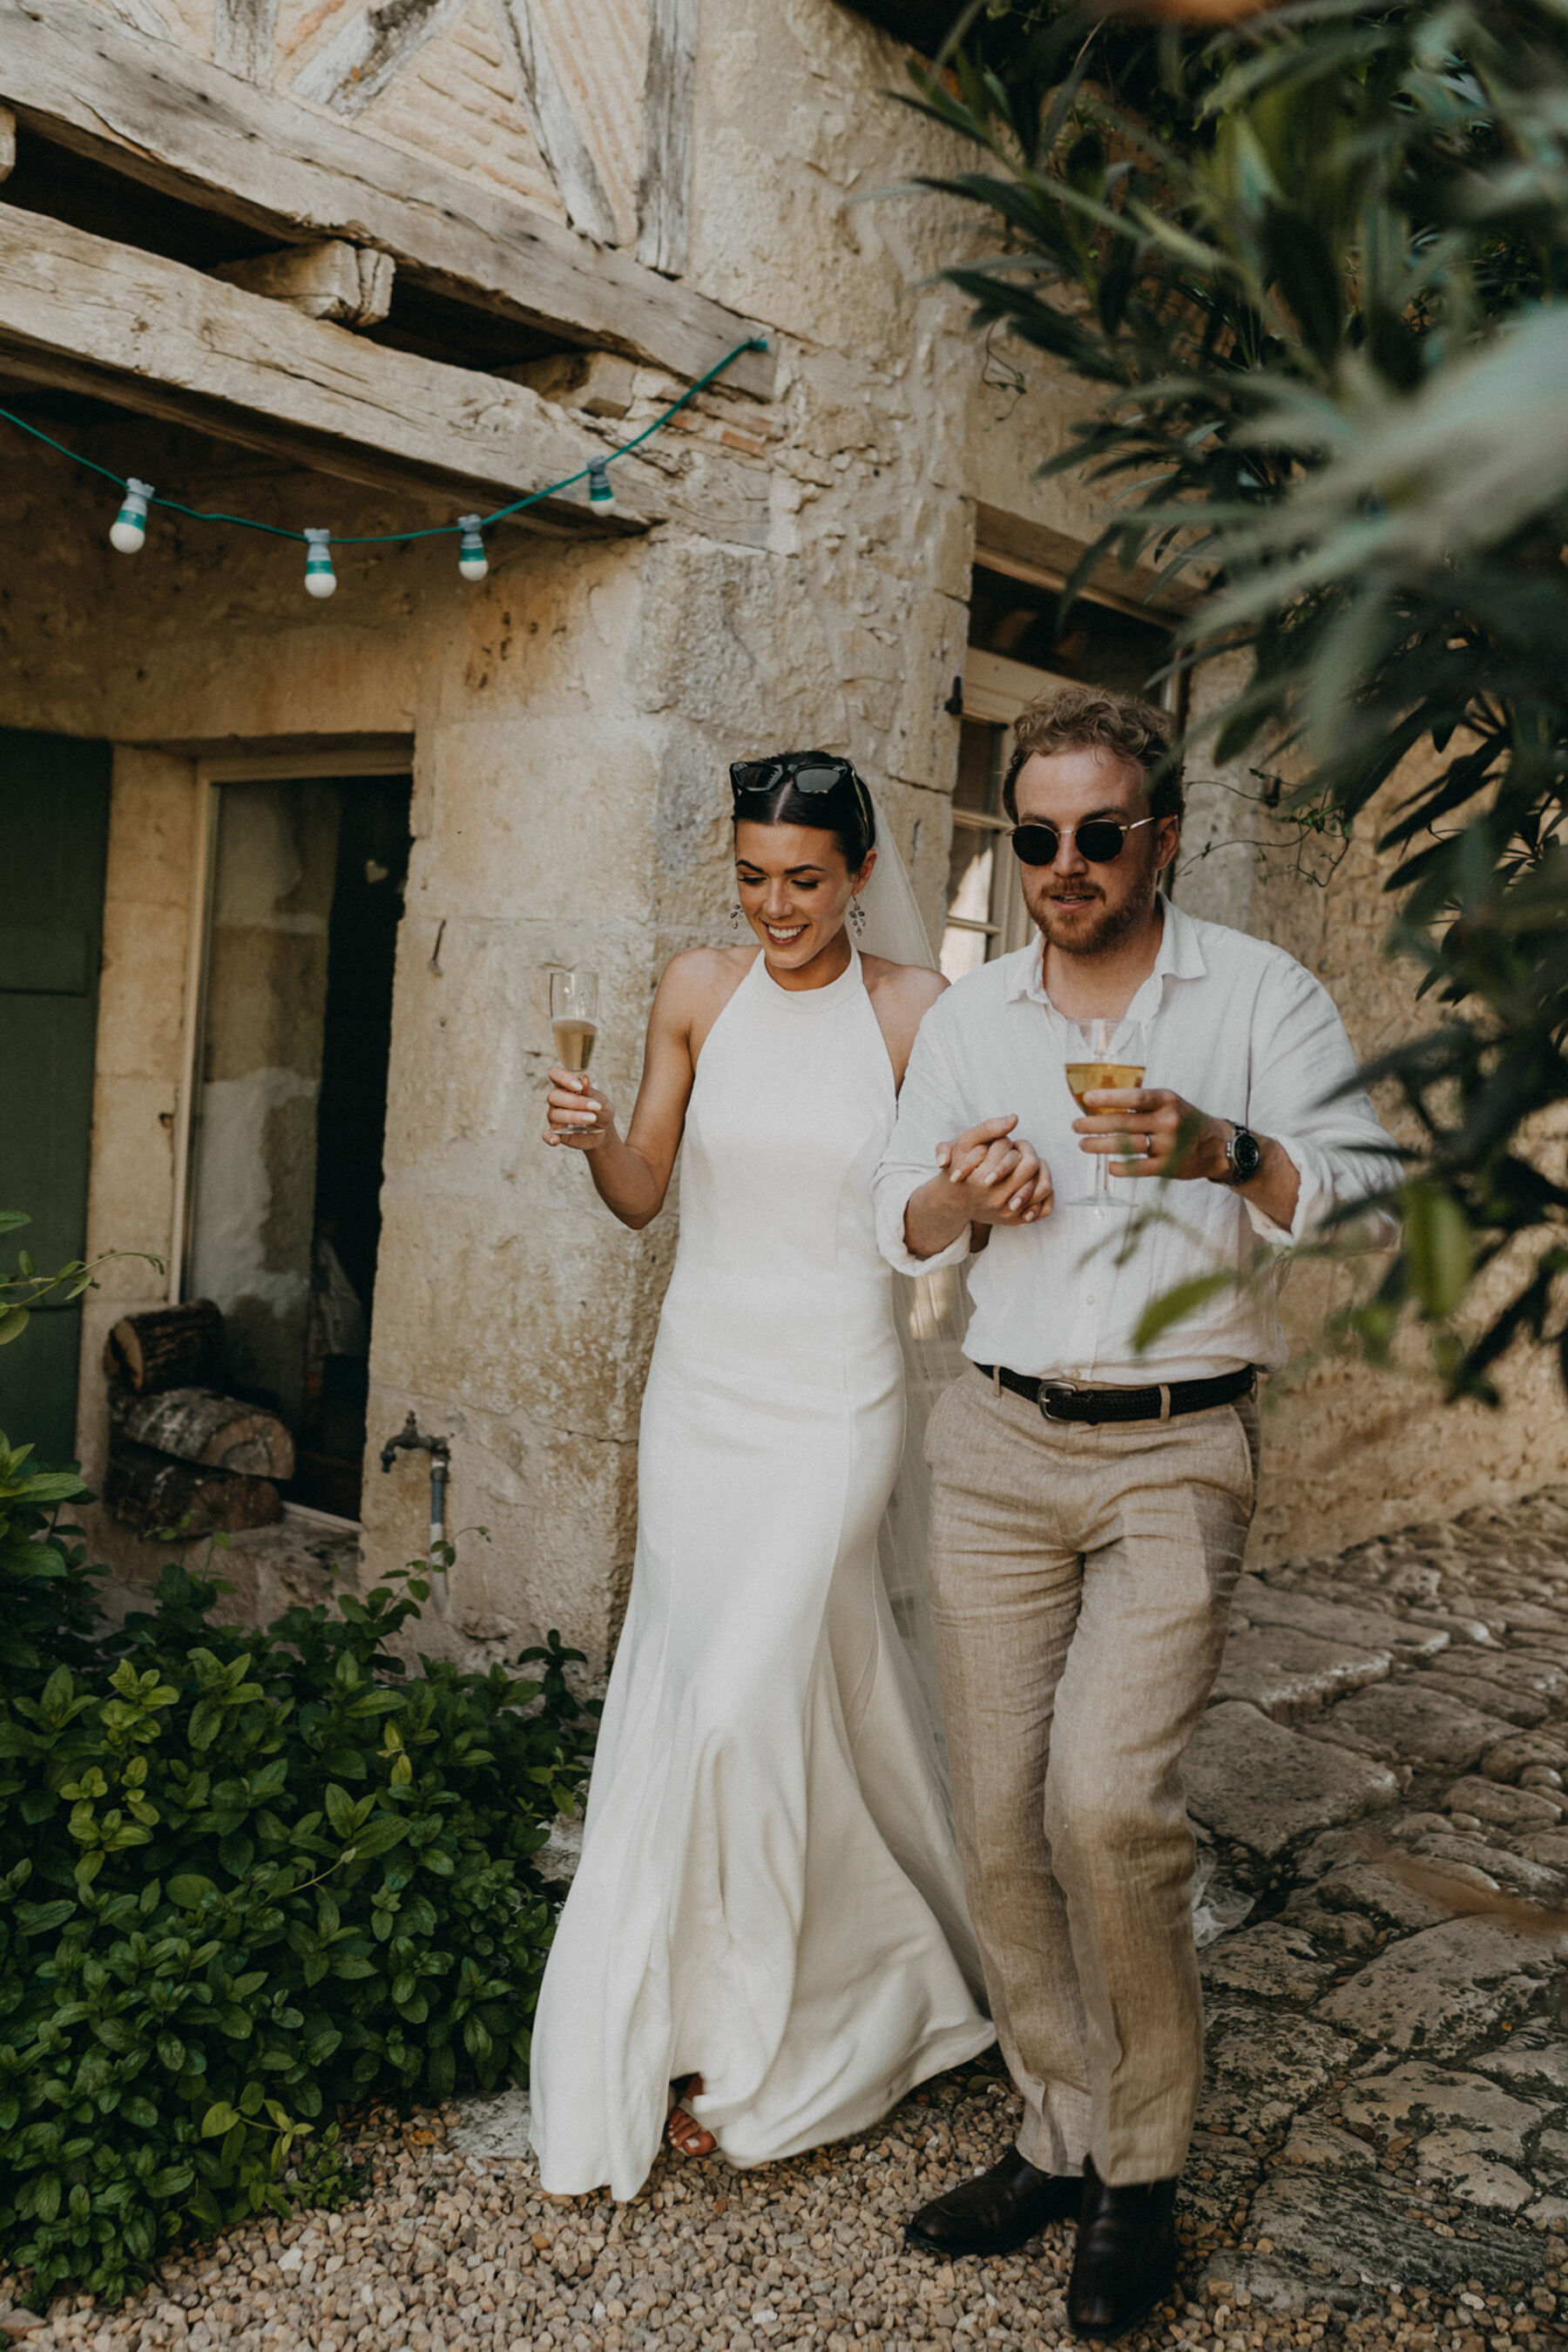 Bride in a halterneck wedding dress holding a glass of chapaign with her groom in a linen shirt and beige trousers.